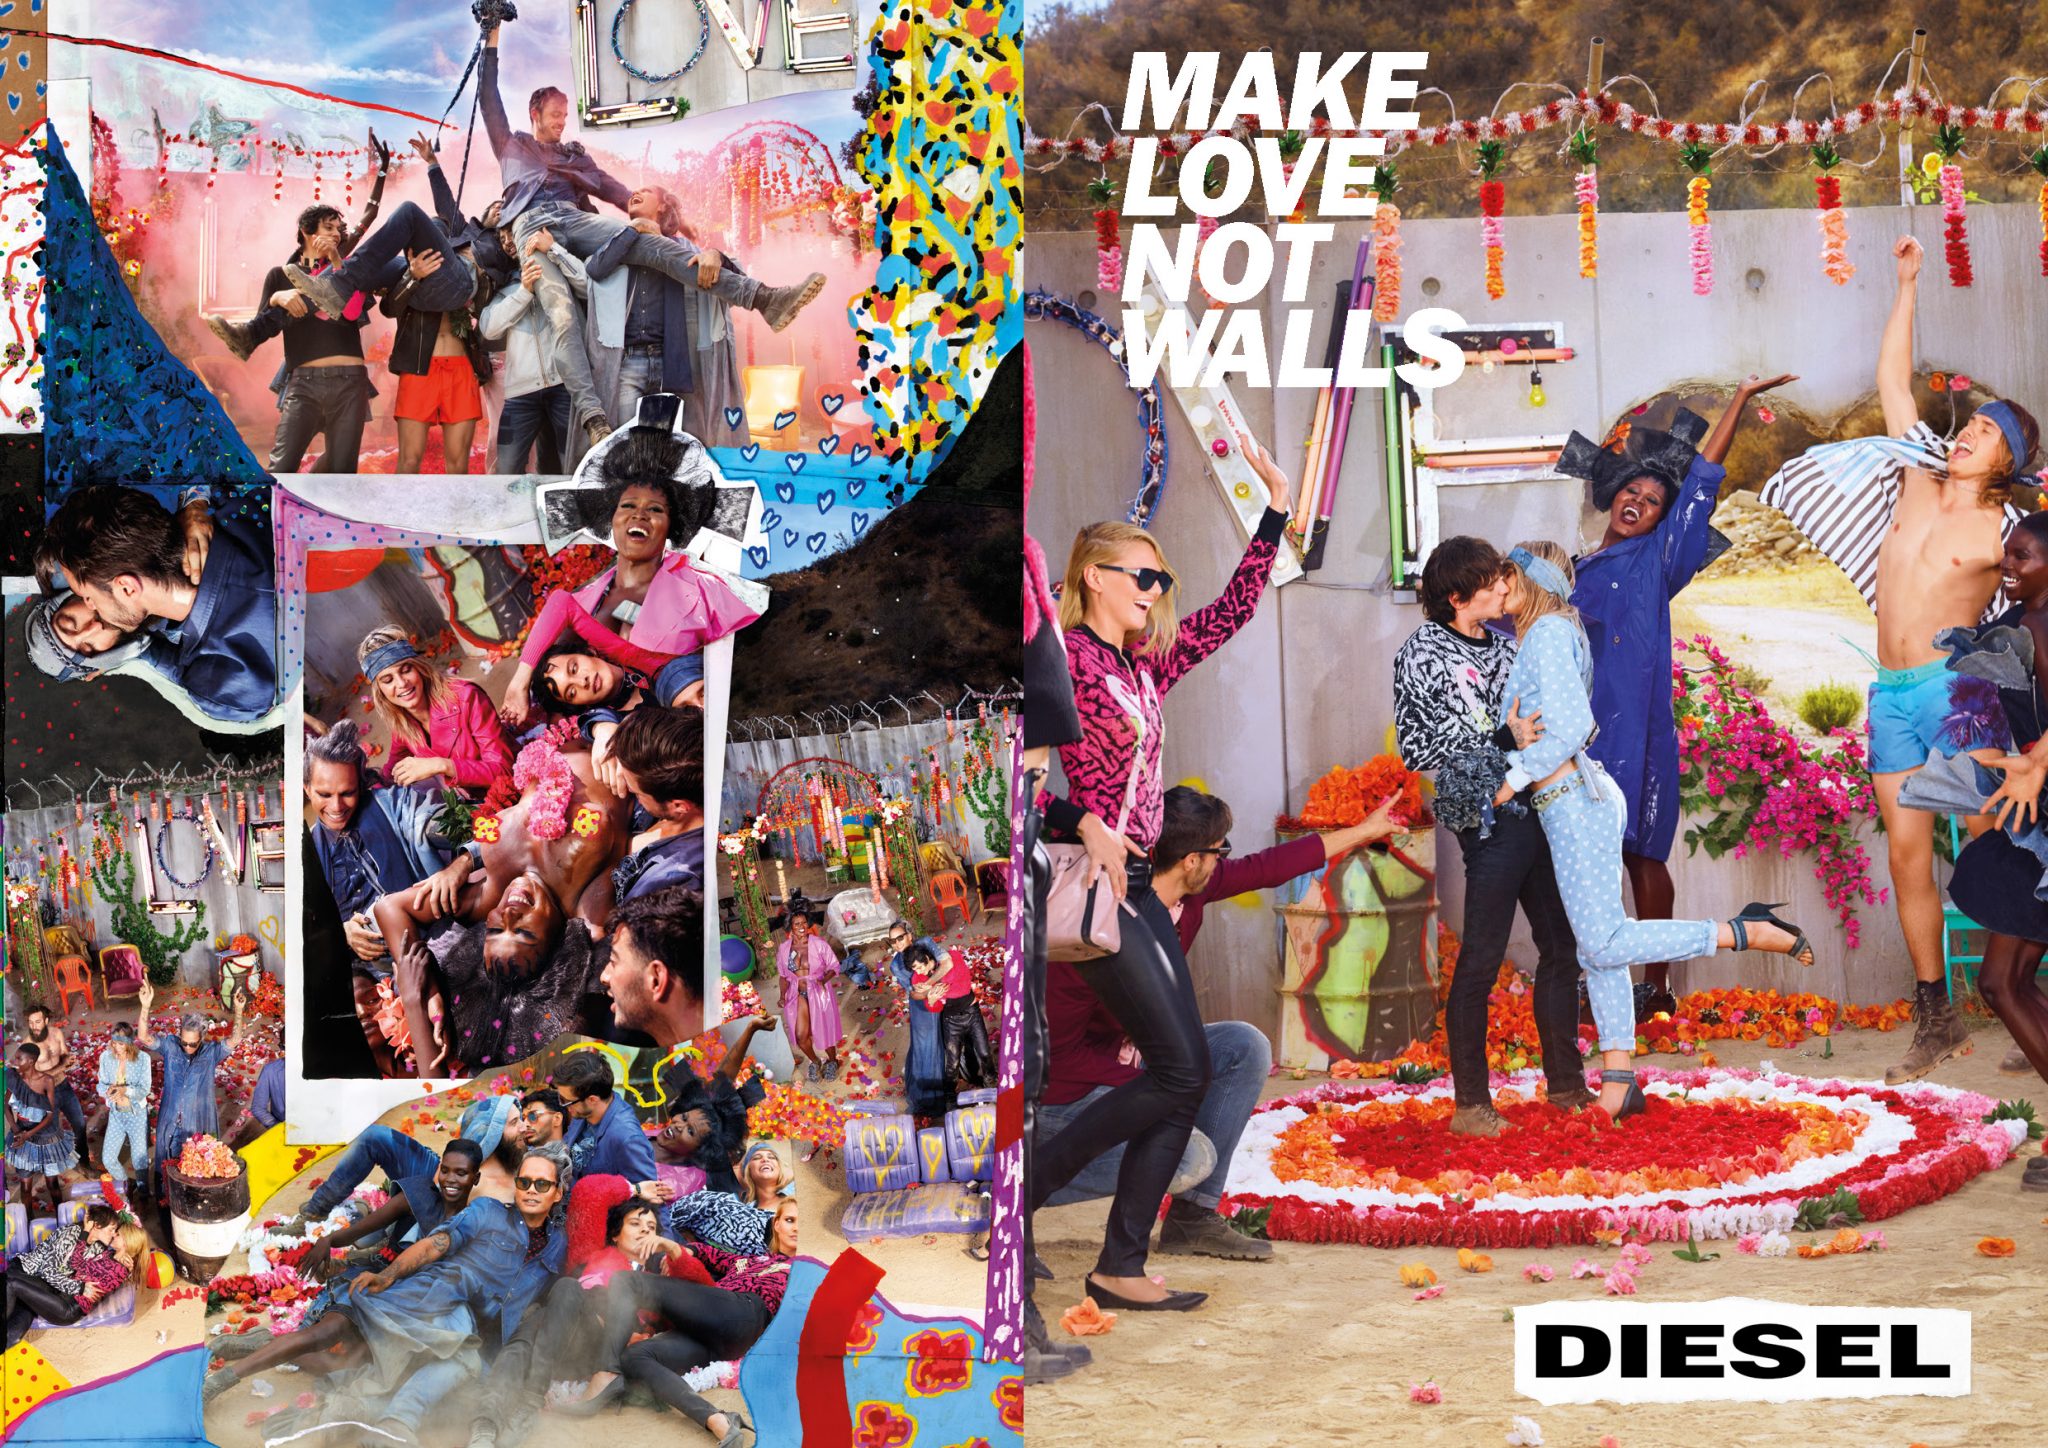 David LaChapelle | Diesel - Make love not walls | The award-winning multidisciplinary campaign launched with photography, a short film, and installations that traveled around the globe, putting forward a timely message that pays tribute to inclusion, love, diversity, and fraternity.
| 15